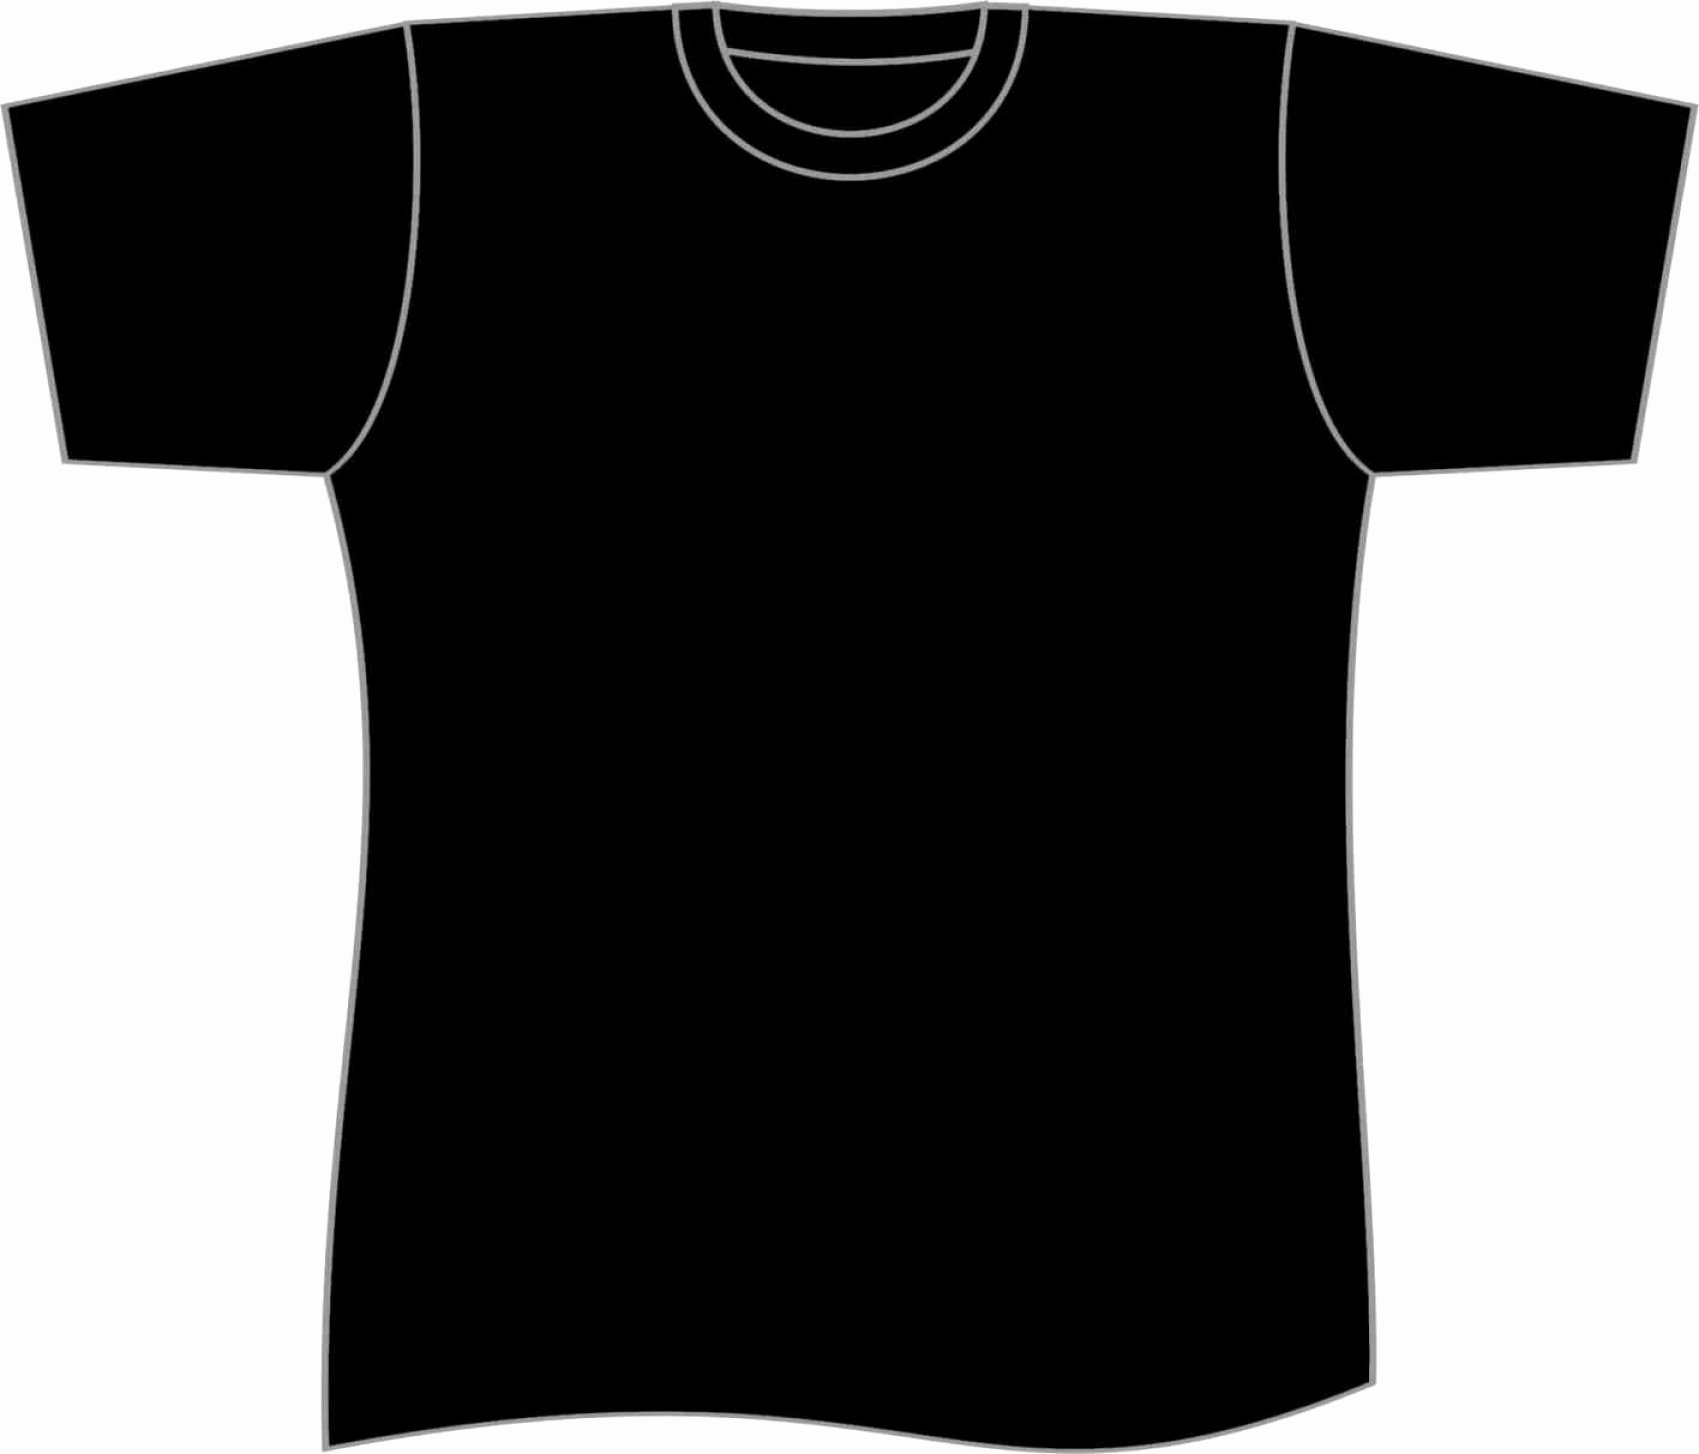 Download Plain T Shirt Vector at Vectorified.com | Collection of Plain T Shirt Vector free for personal use